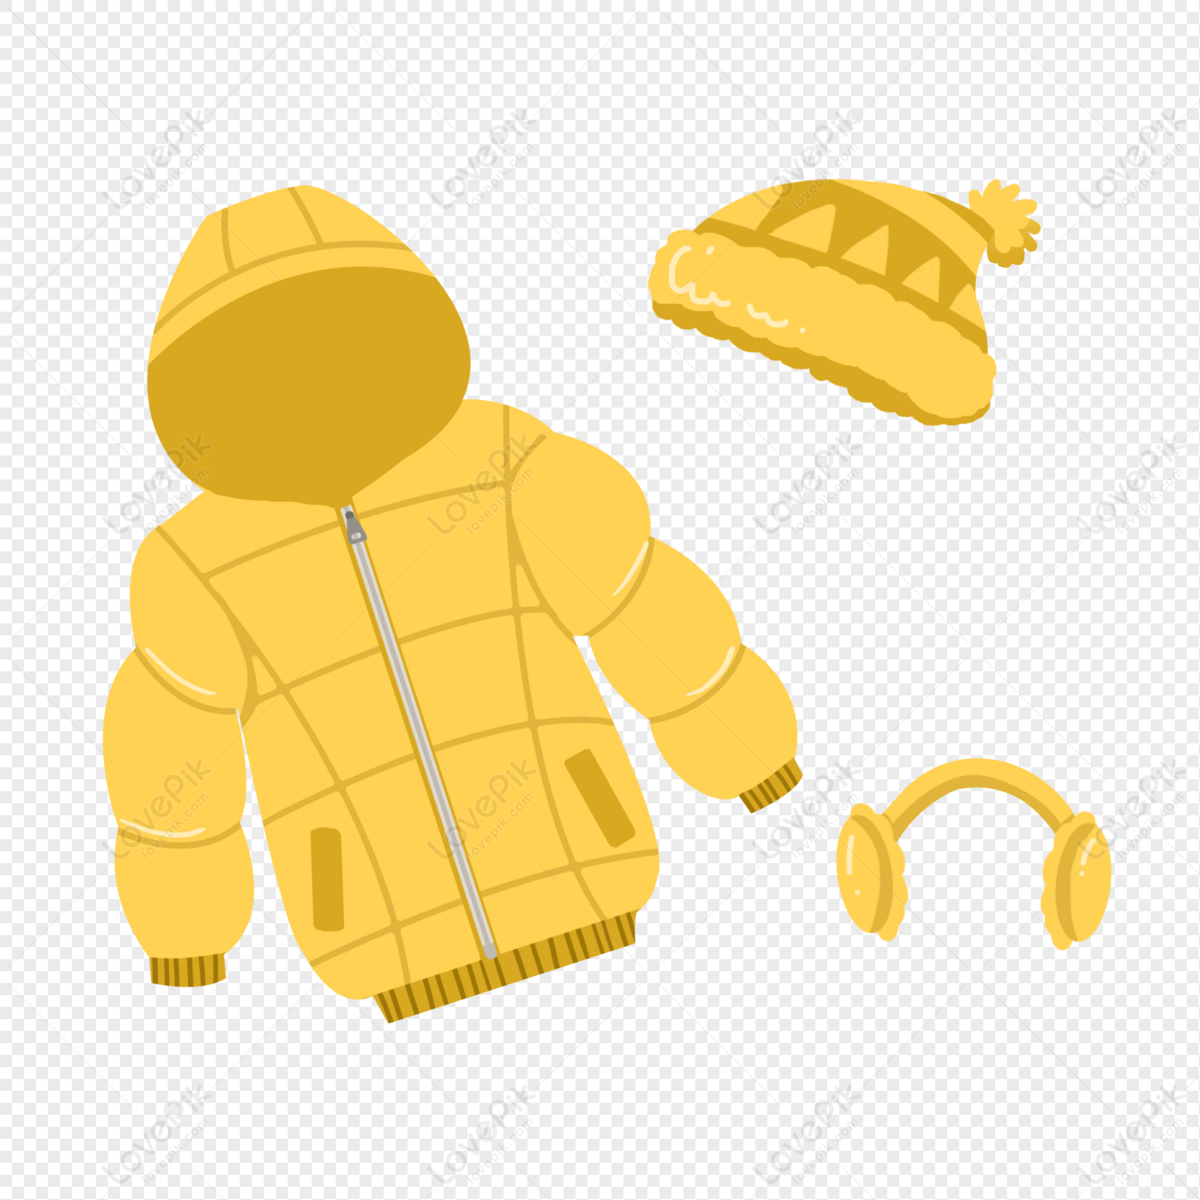 Winter Clothes Combination Cartoon Elements Free PNG And Clipart Image For  Free Download - Lovepik | 401869549